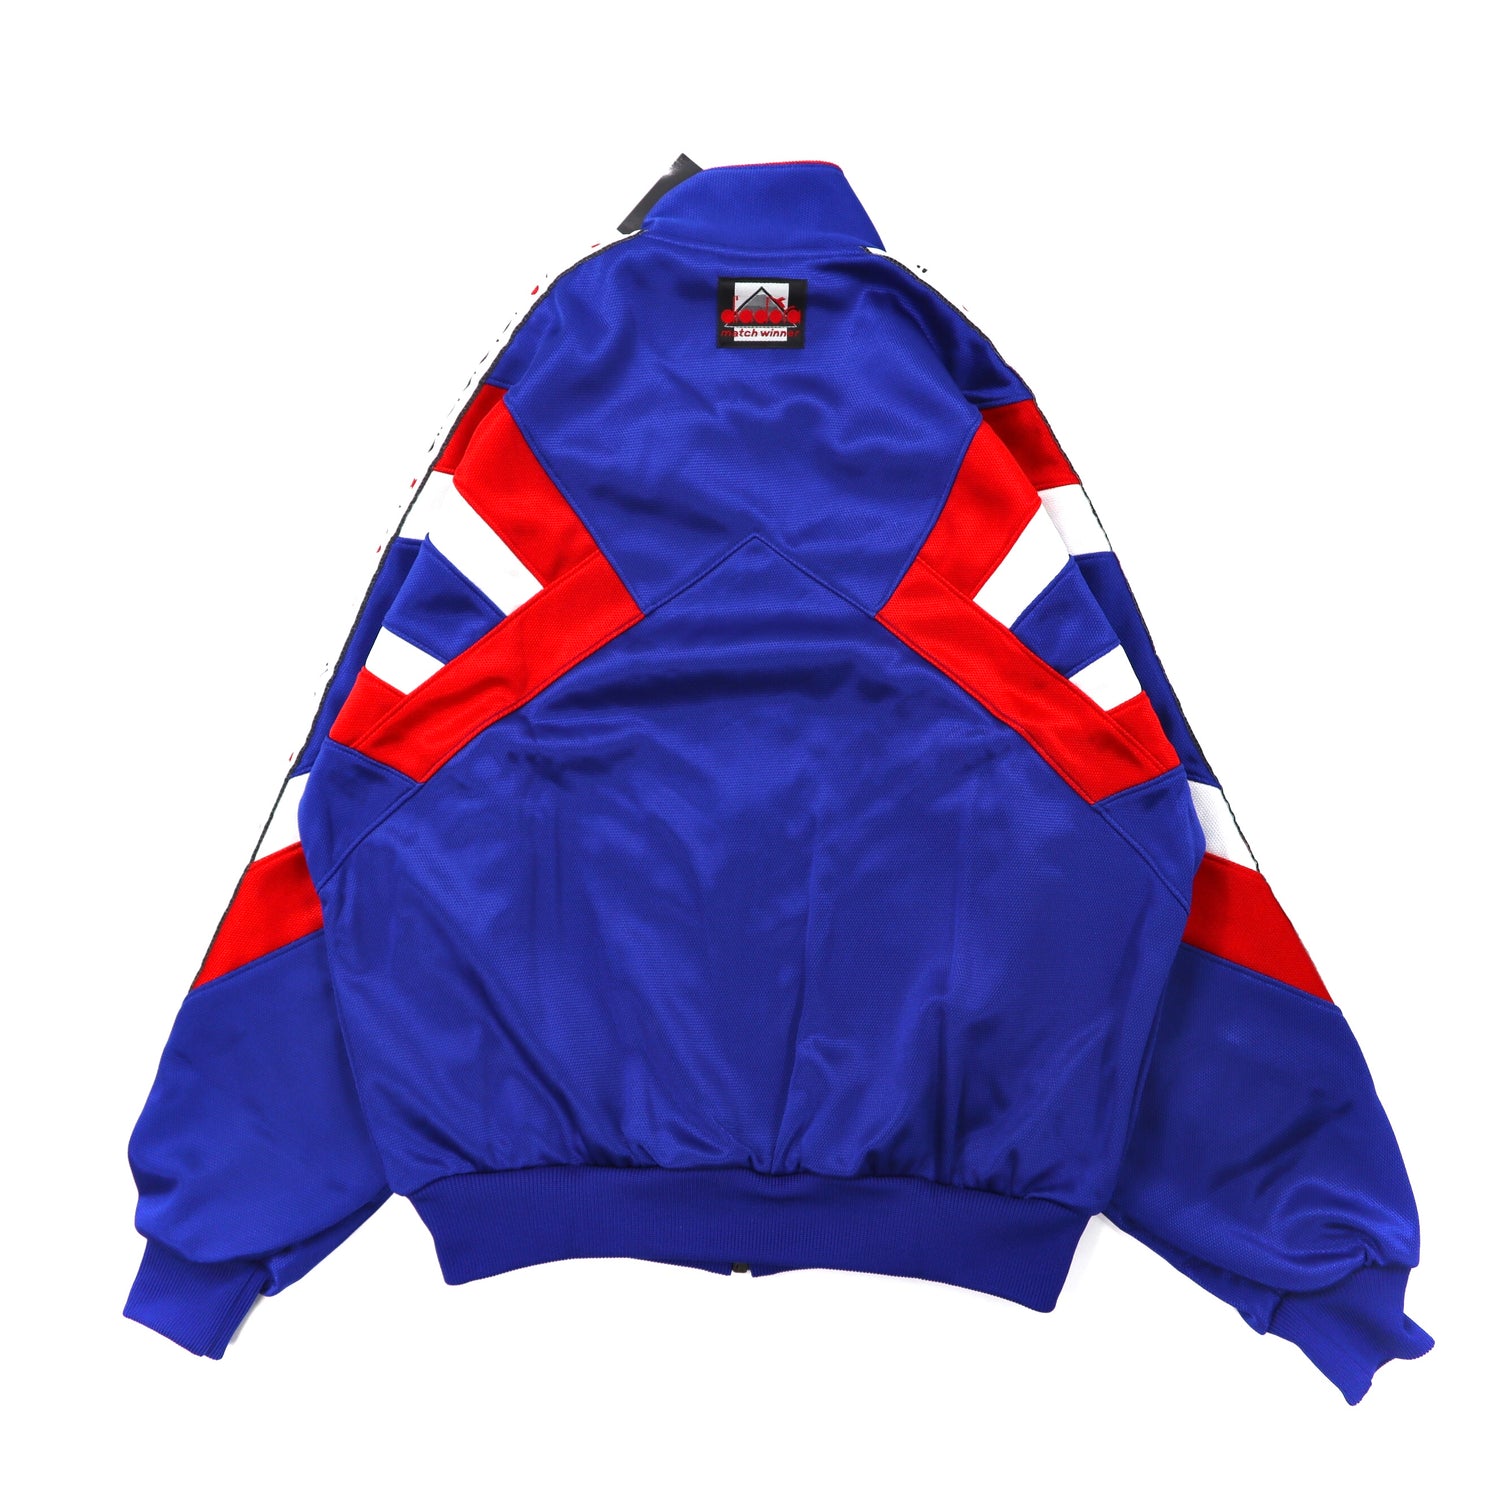 DIADORA TRACK JACKET S Blue Polyester side line logo embroidery 